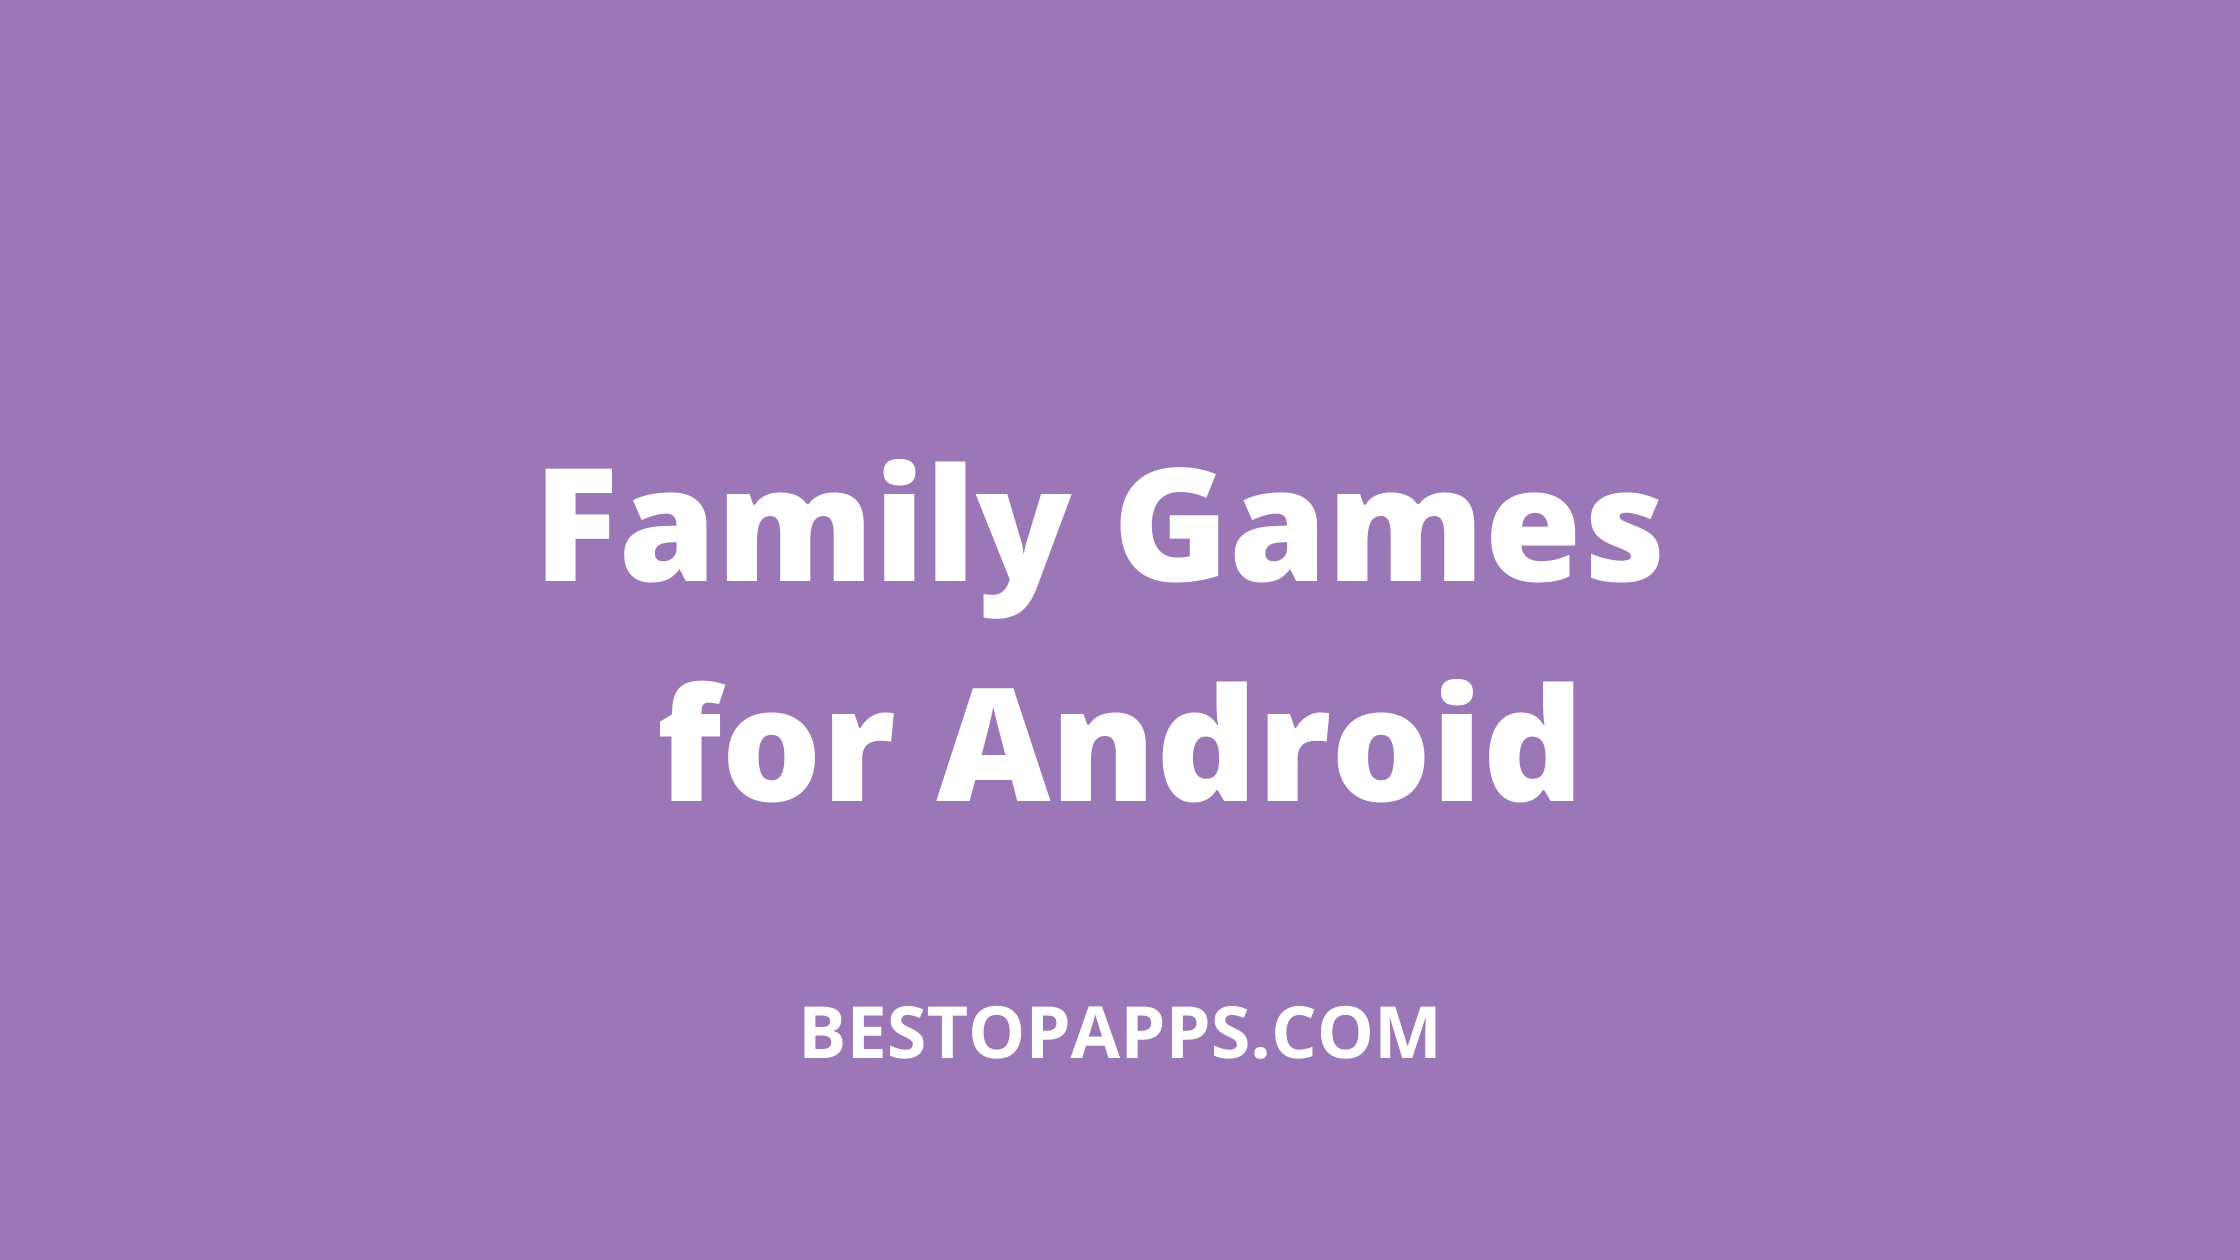 Family Games for Android